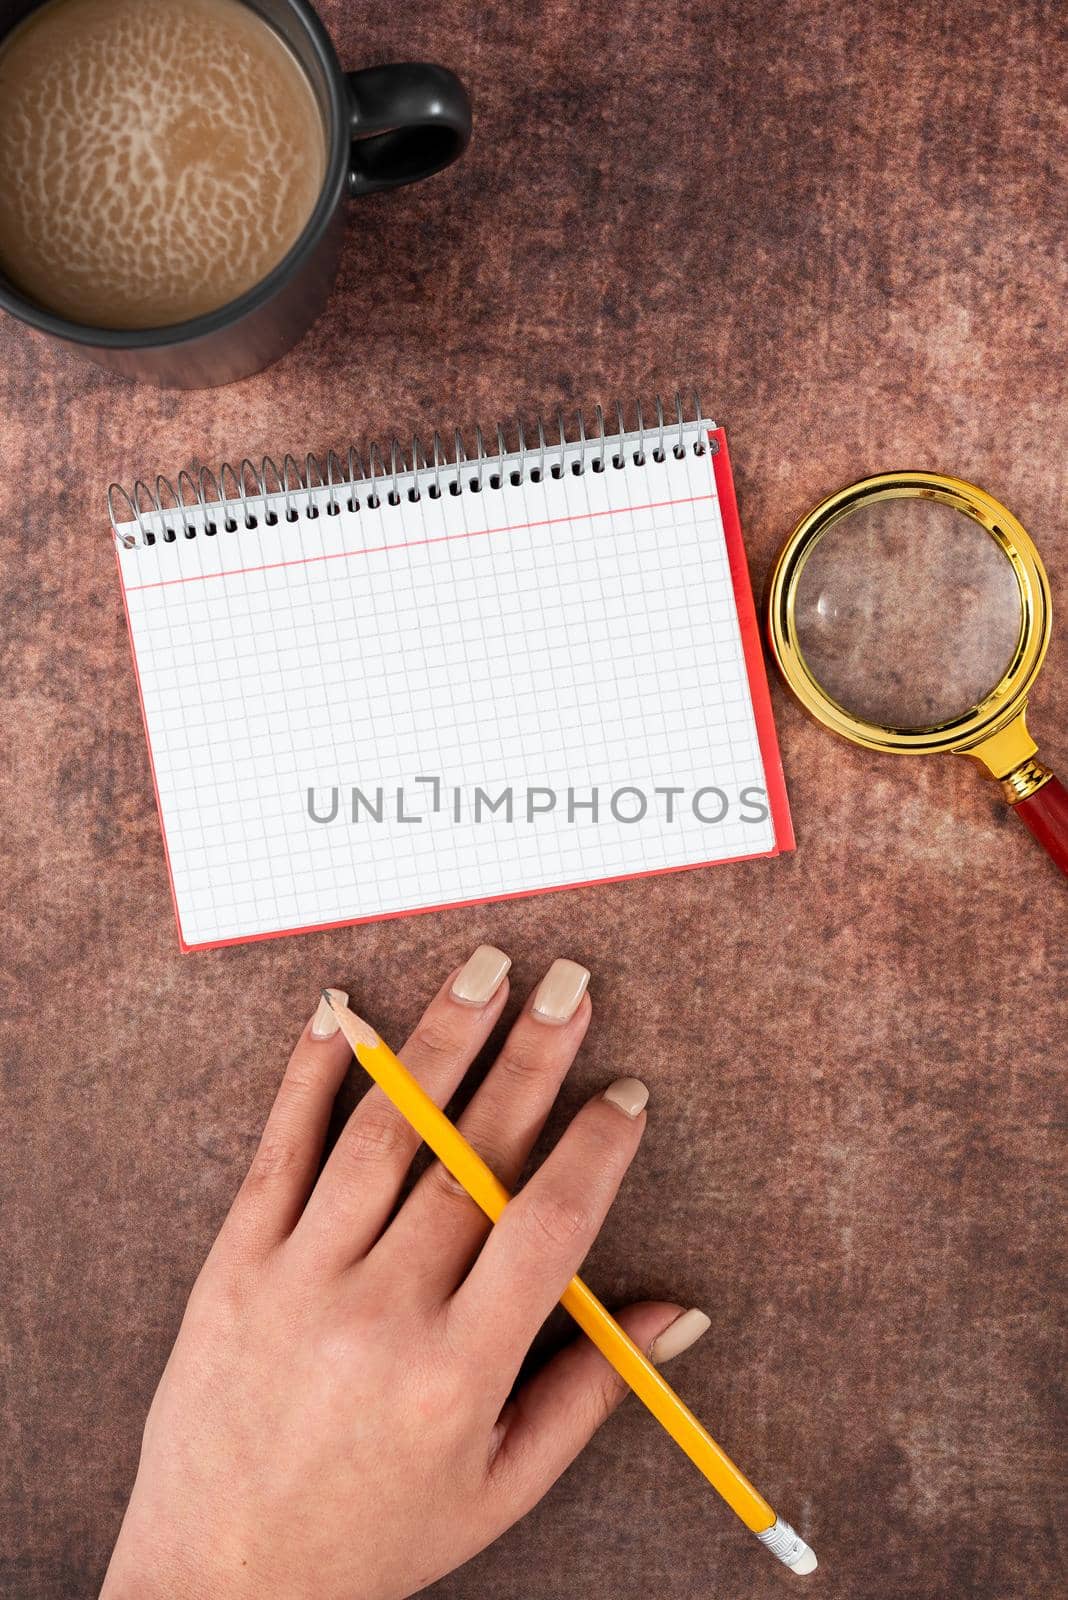 Hand Of Woman Spiral Notebook, Magnifying Glass And Coffee Cup On Wood.